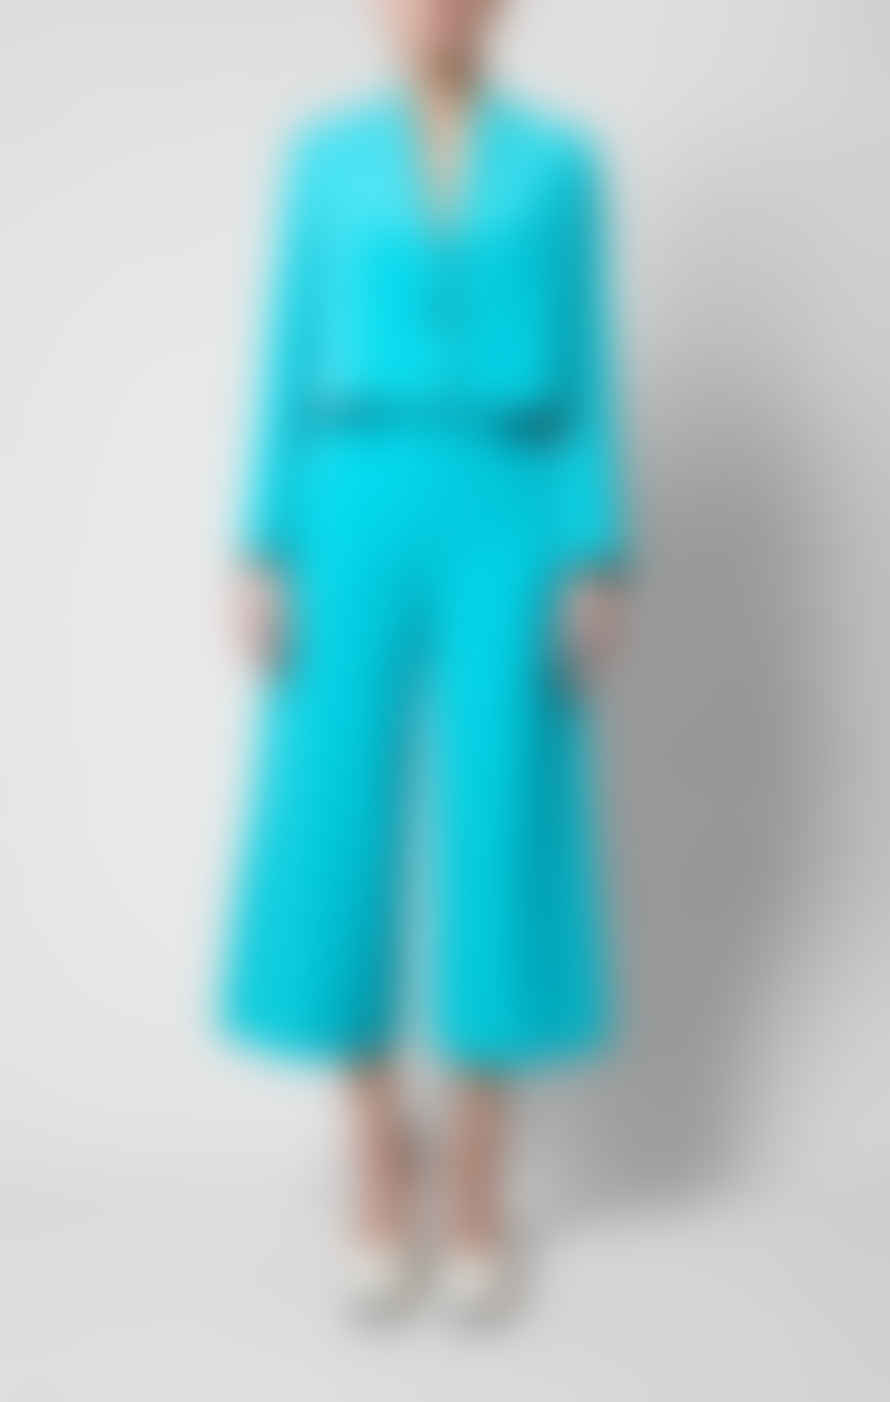 French Connection Jaded Teal Echo Crepe Culottes